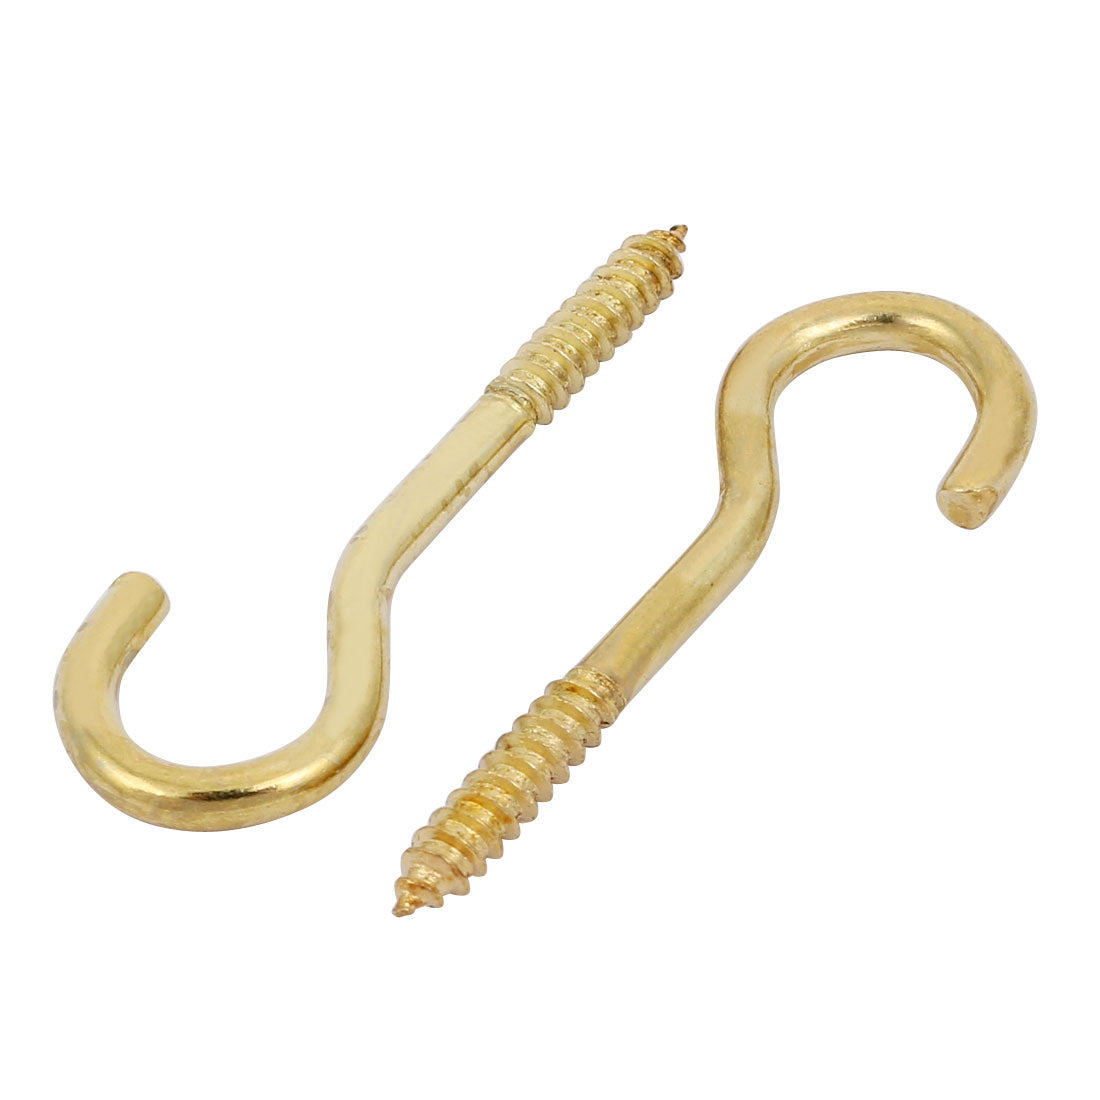 uxcell Uxcell 3.7mm Dia Thread 45mm Length Iron Brass Plated Self-Tapping Screw Hook 50pcs